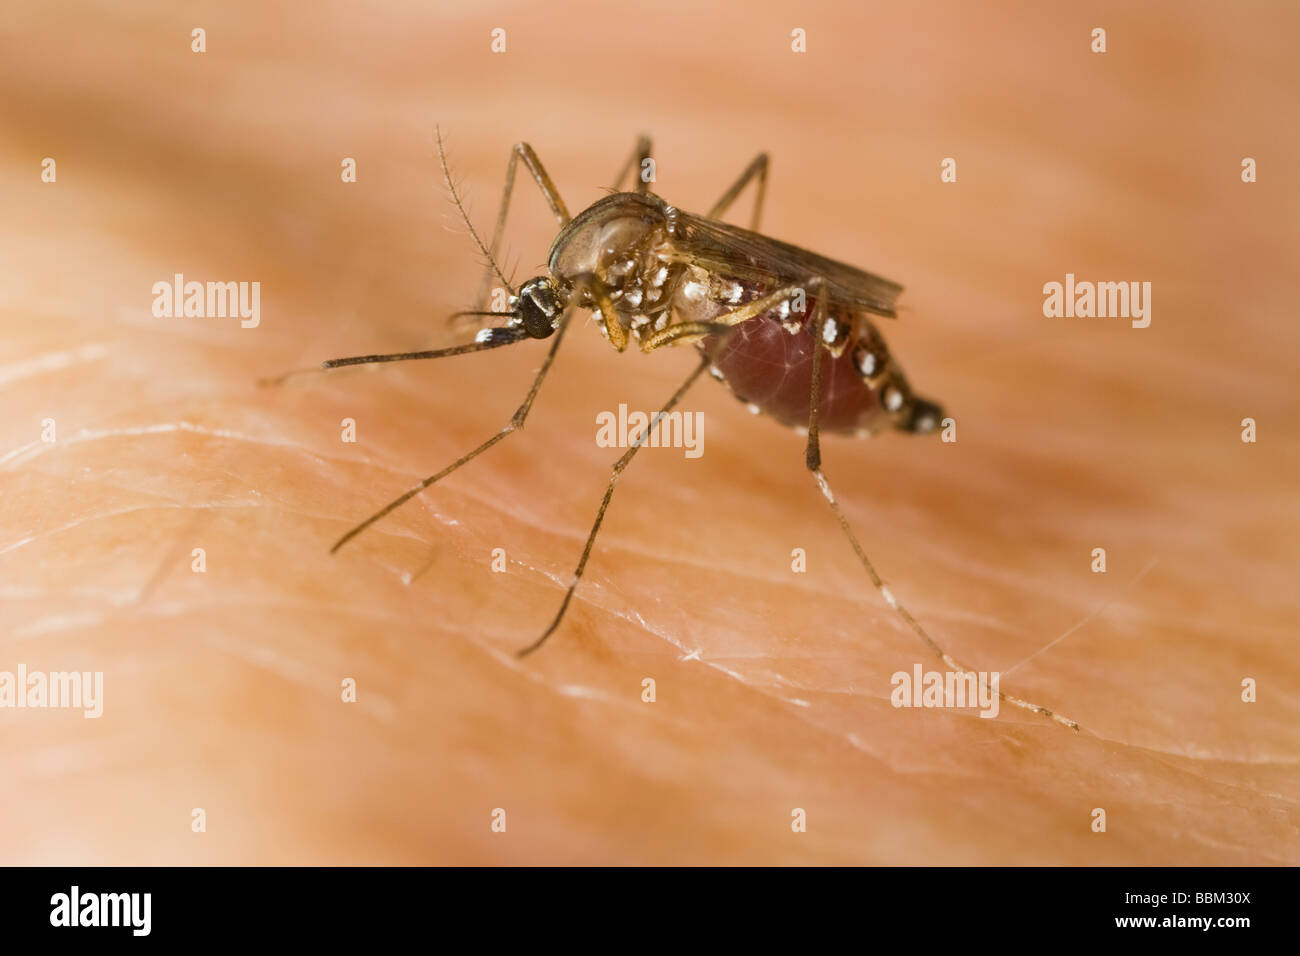 female Yellow Fever mosquito (Aedes aegypti) biting a human arm Stock Photo